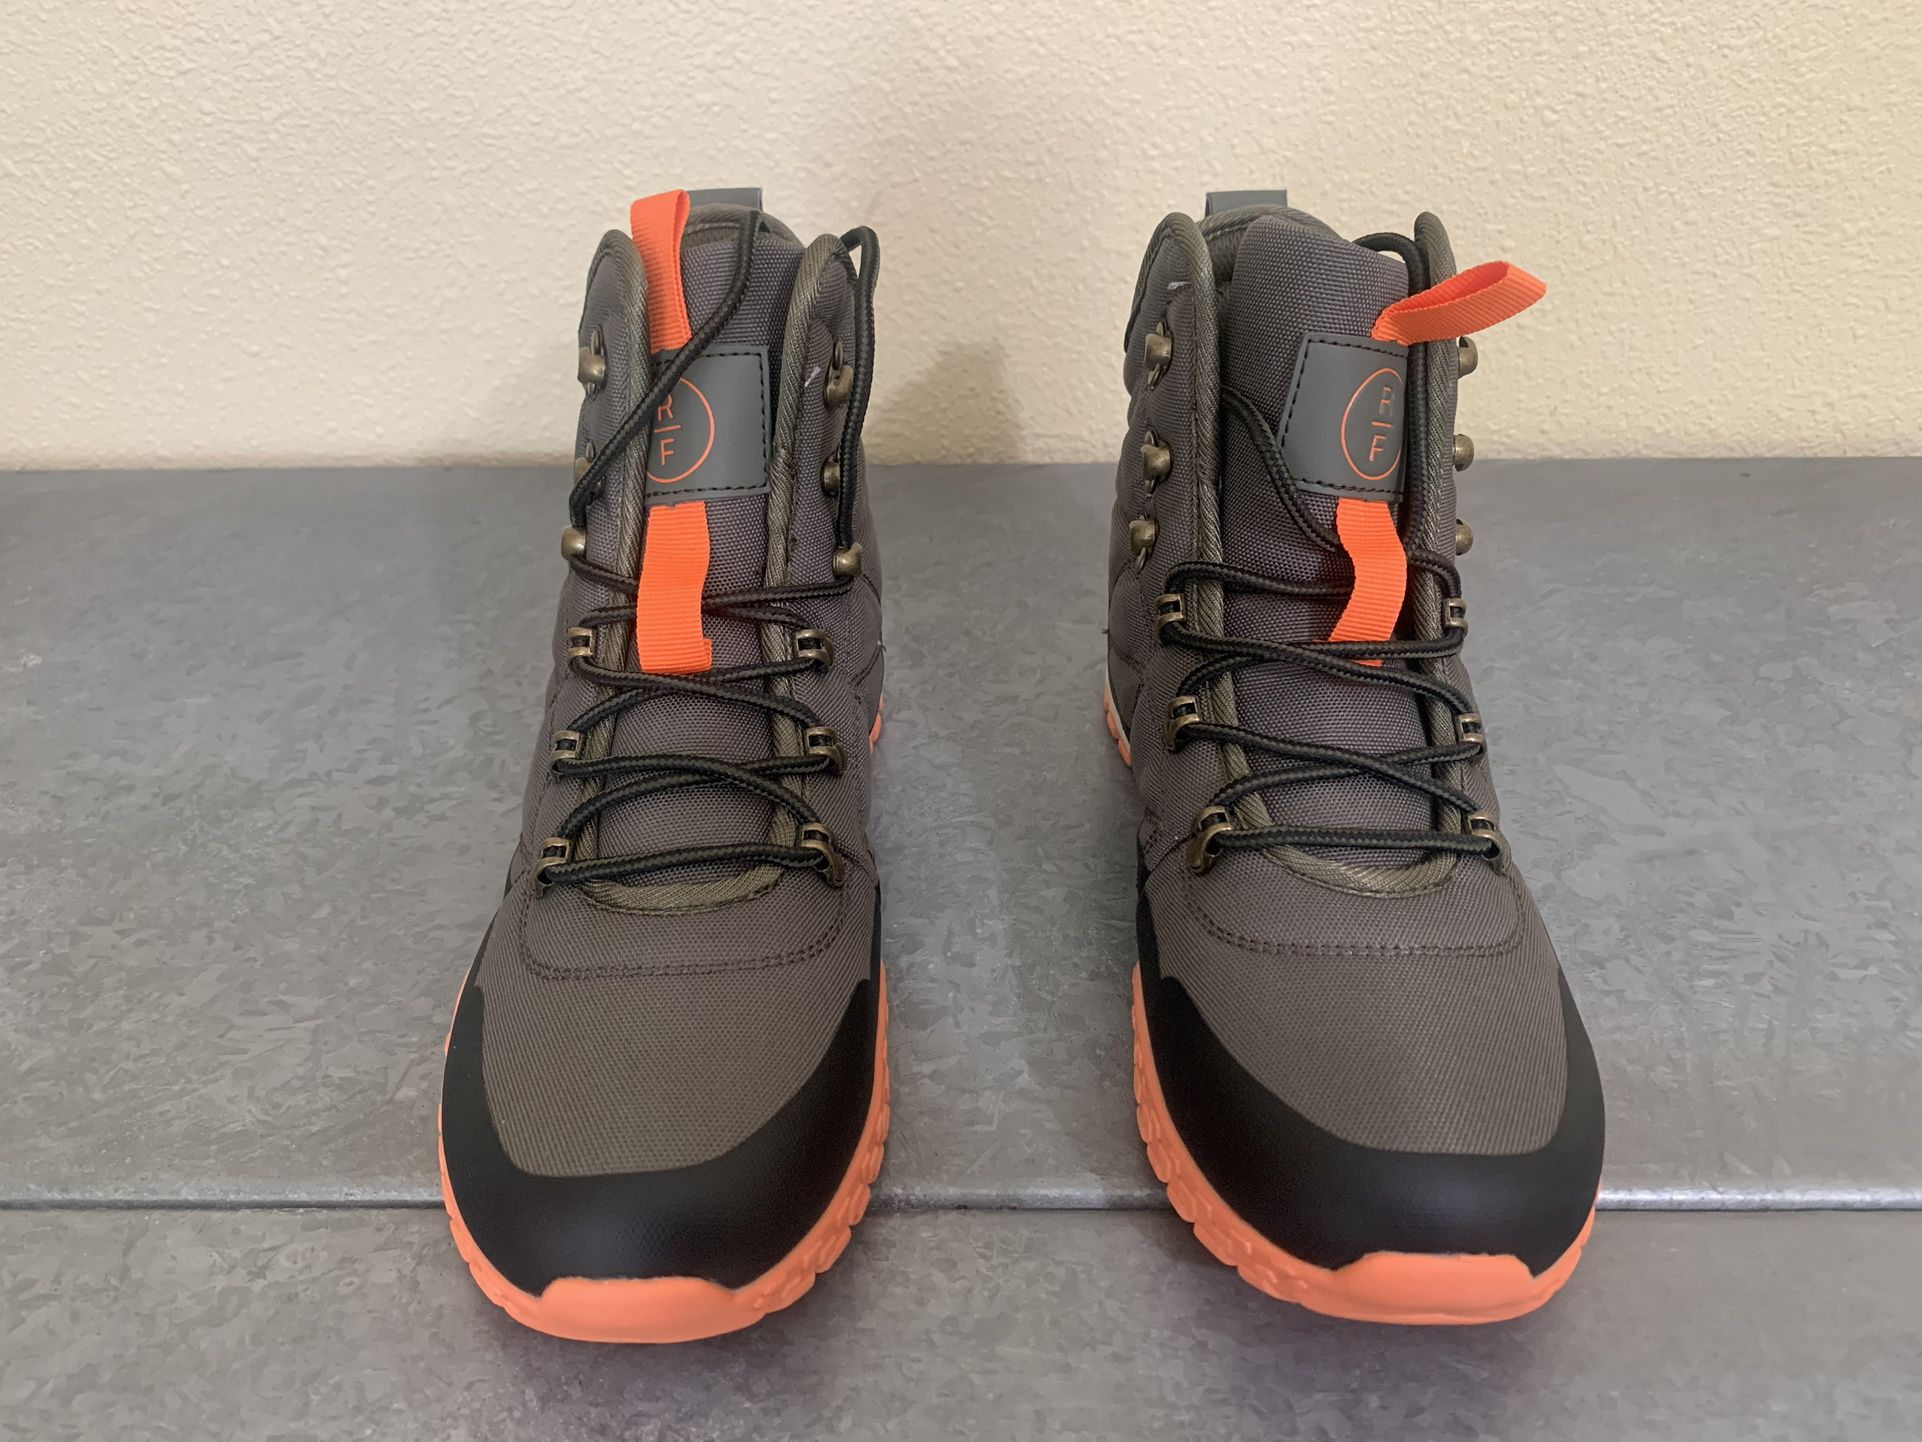 Reserved Footwear Men’s Hiking Boots